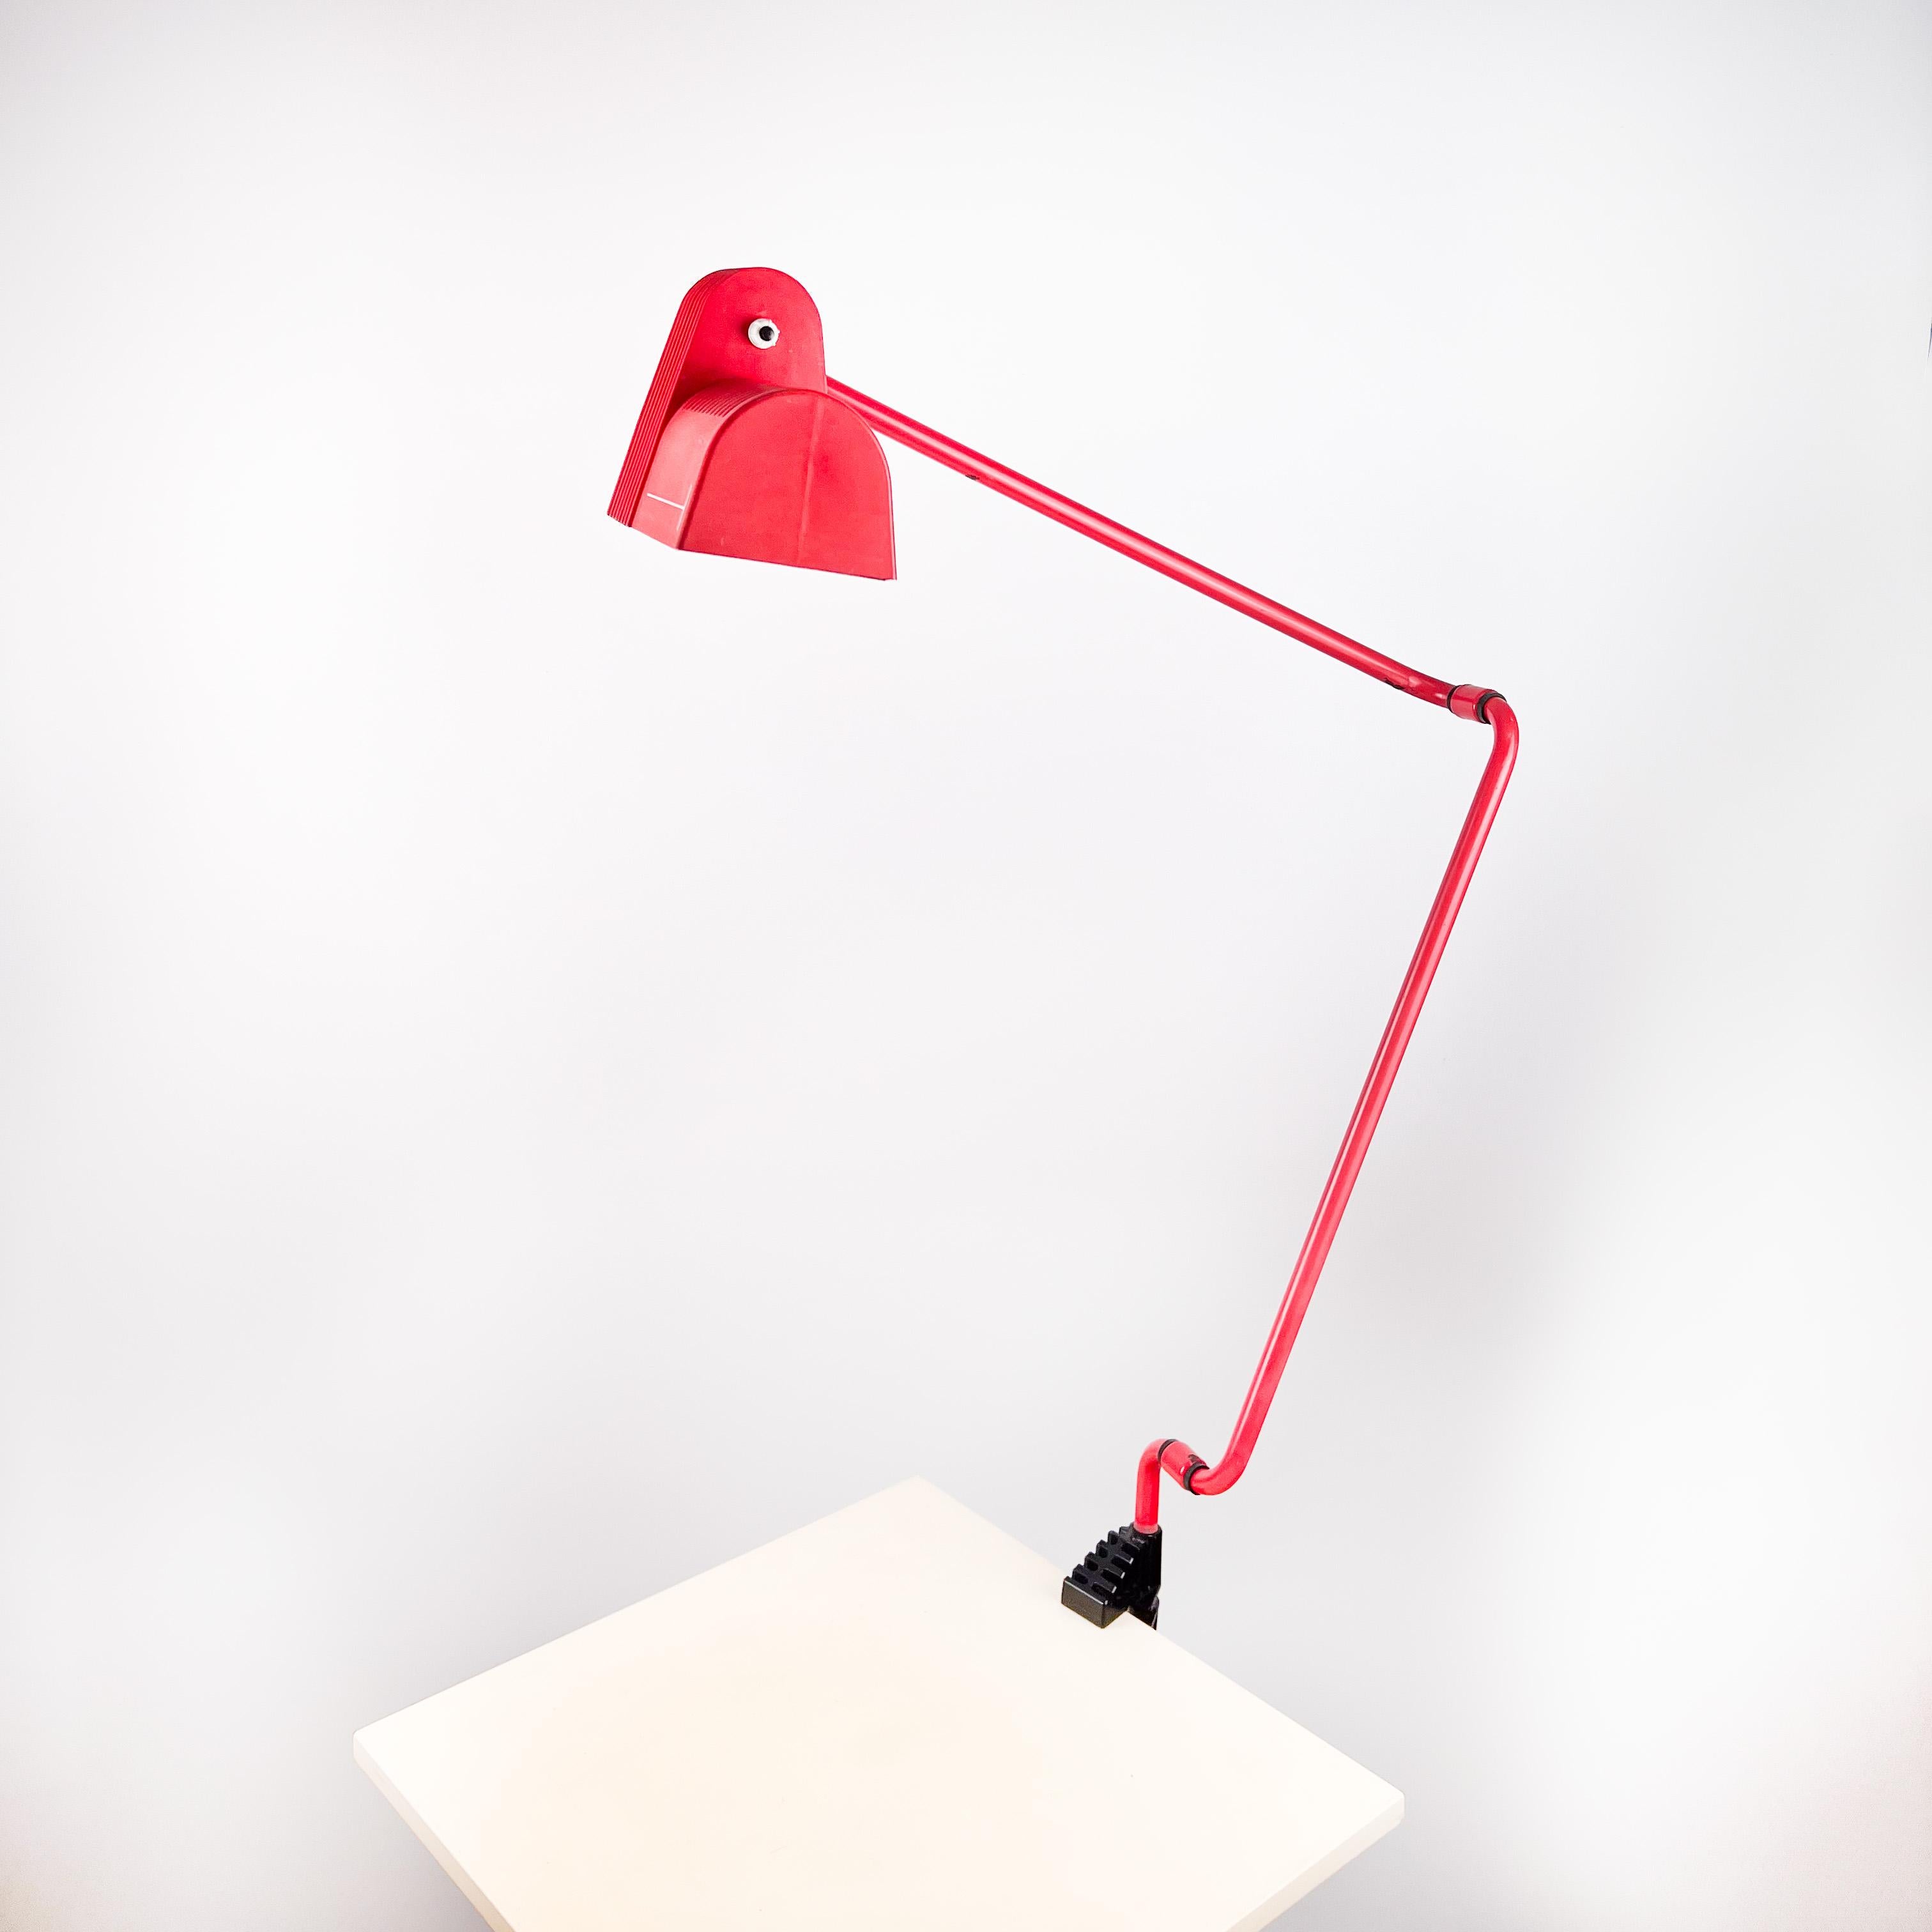 Belux System lamp designed by Guillermo Capdevilla, 1981.

Two mobile arms made of red lacquered metal, the plastic lampshade.

Plastic table holder. E27 bulb

The arms measure 110 cm. fully extended, each measures 50 cm.